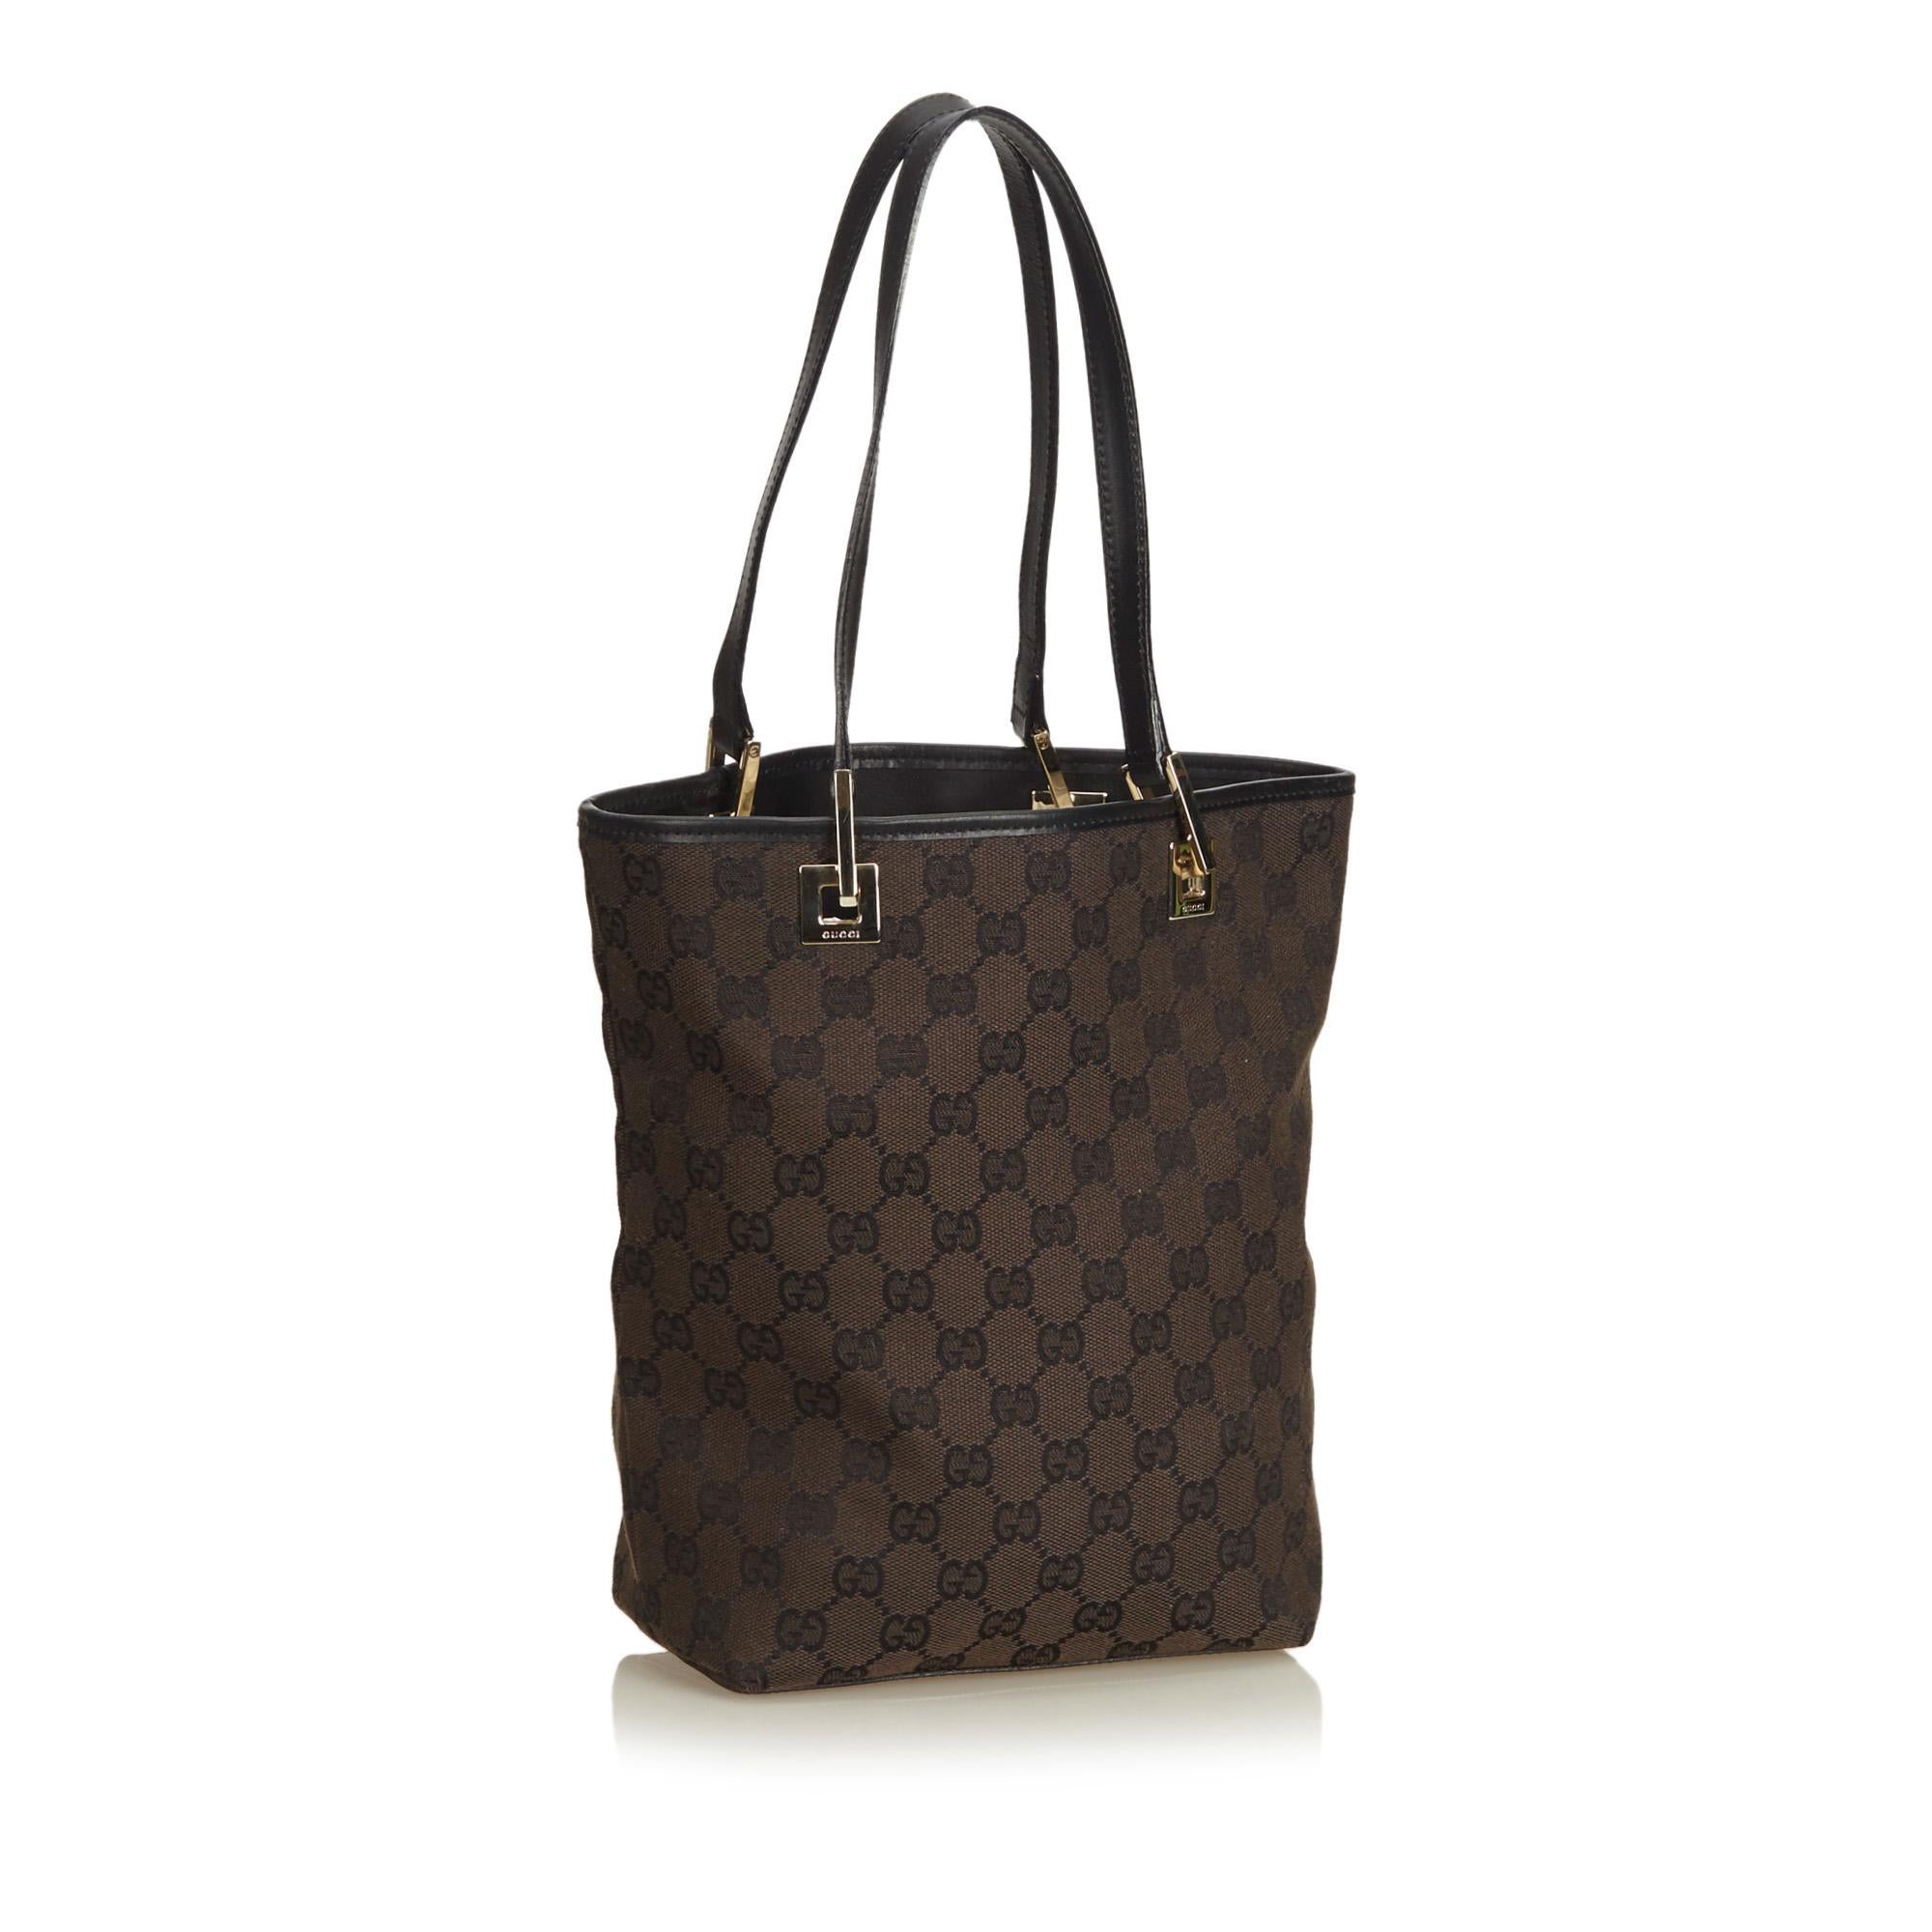 This tote features a canvas body, flat leather handles, an open top, and an interior zip pocket.

It carries a AB condition rating.

Dimensions: 
Length 24.00 cm
Width 26.00 cm
Depth 10.00 cm
Shoulder Drop 19.00 cm

Inclusions: No longer comes with